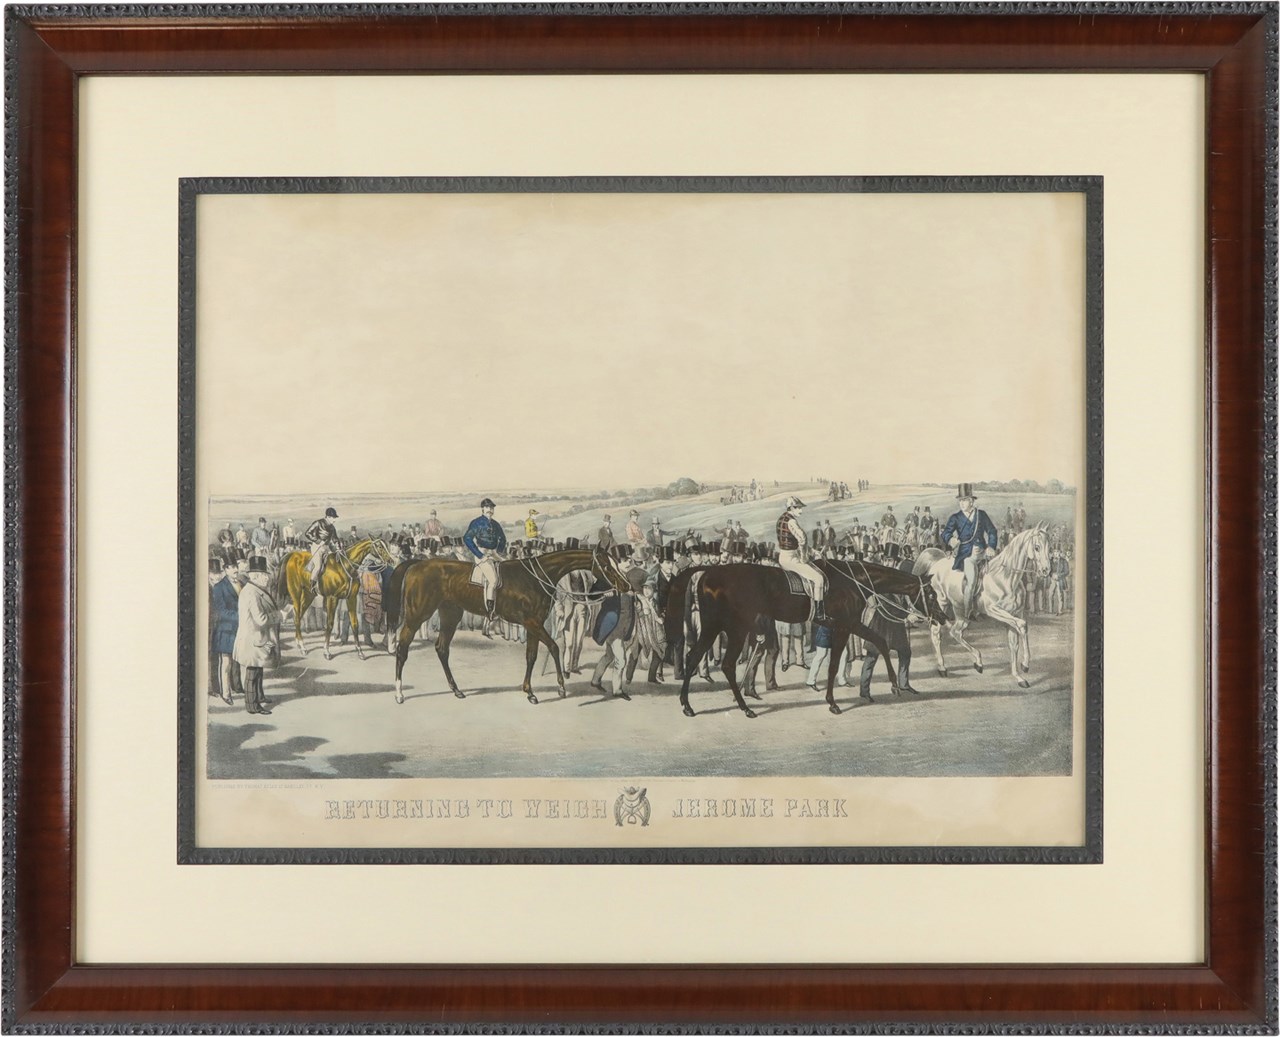 - Gorgeous Framed Print “Returning to Weigh” By Thomas Kelly, 1870